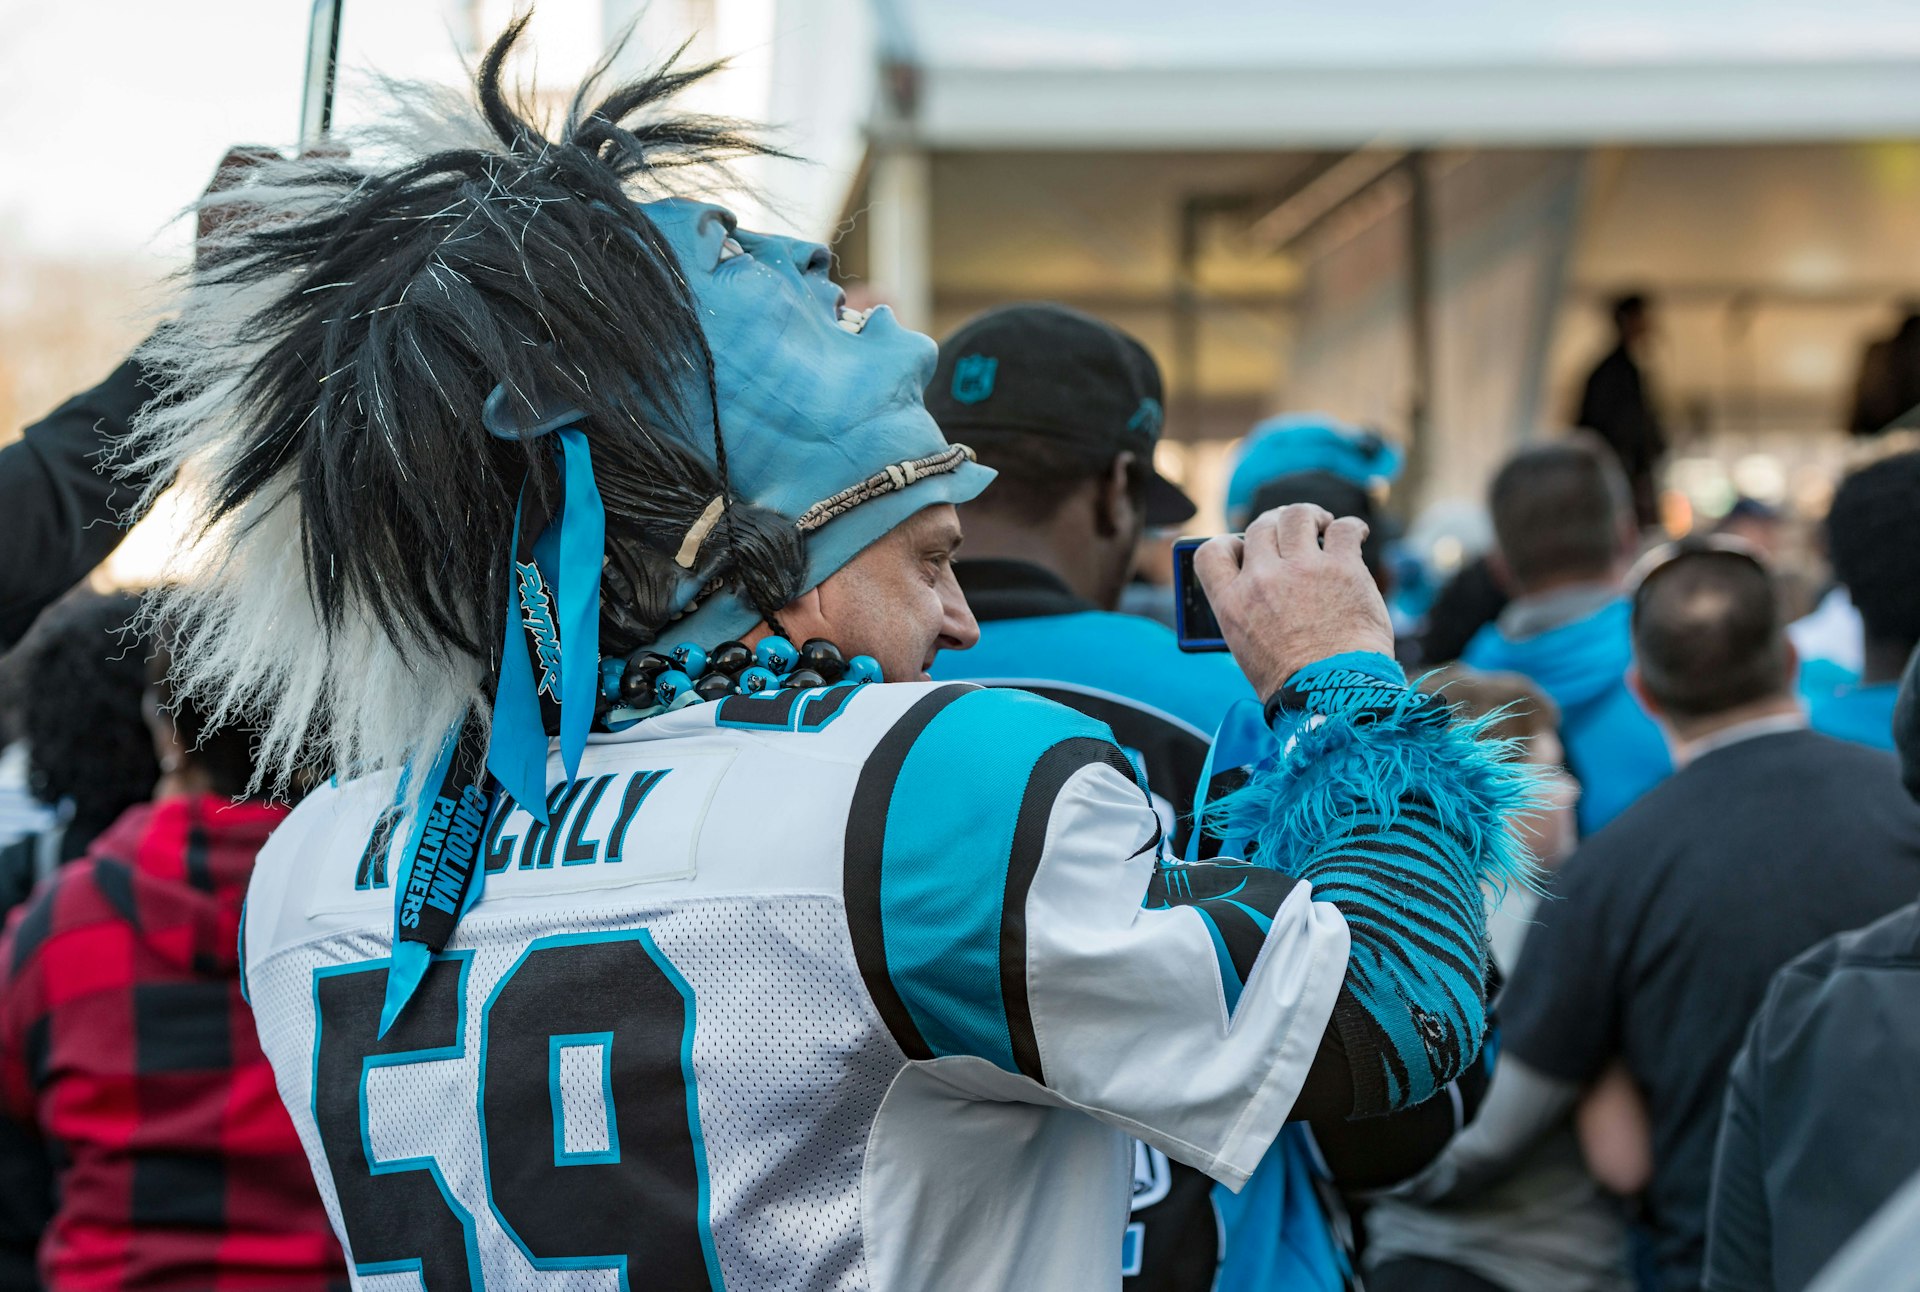 Closeup of a Carolina Panthers football fan, wearing a jersey and a mask pushed back on his head, taking a picture